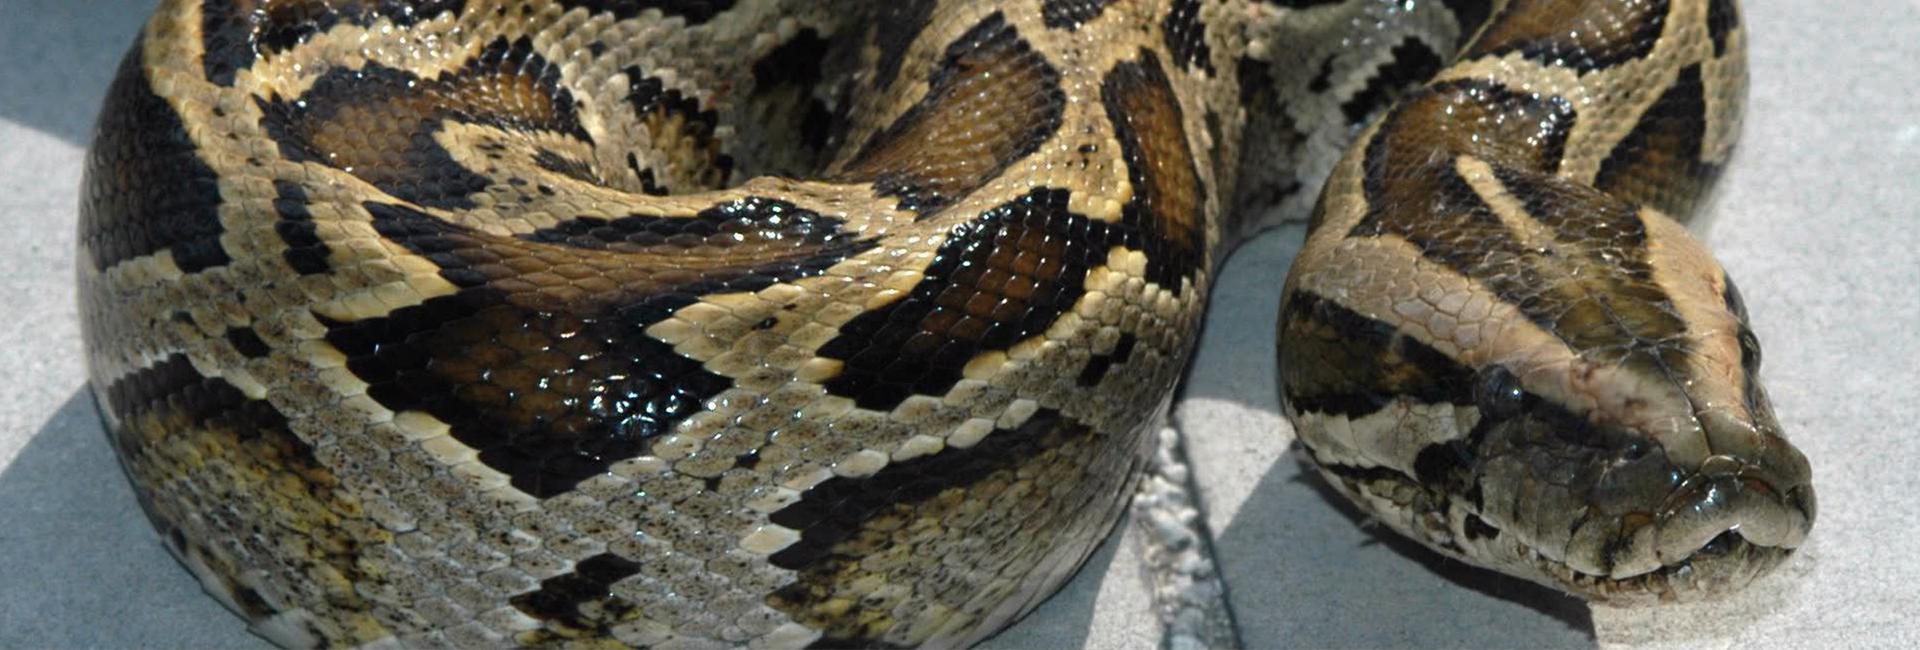 Burmese Pythons are an exotic invader of Florida's Everglades. They threaten the ecosystem since there's no natural predators.